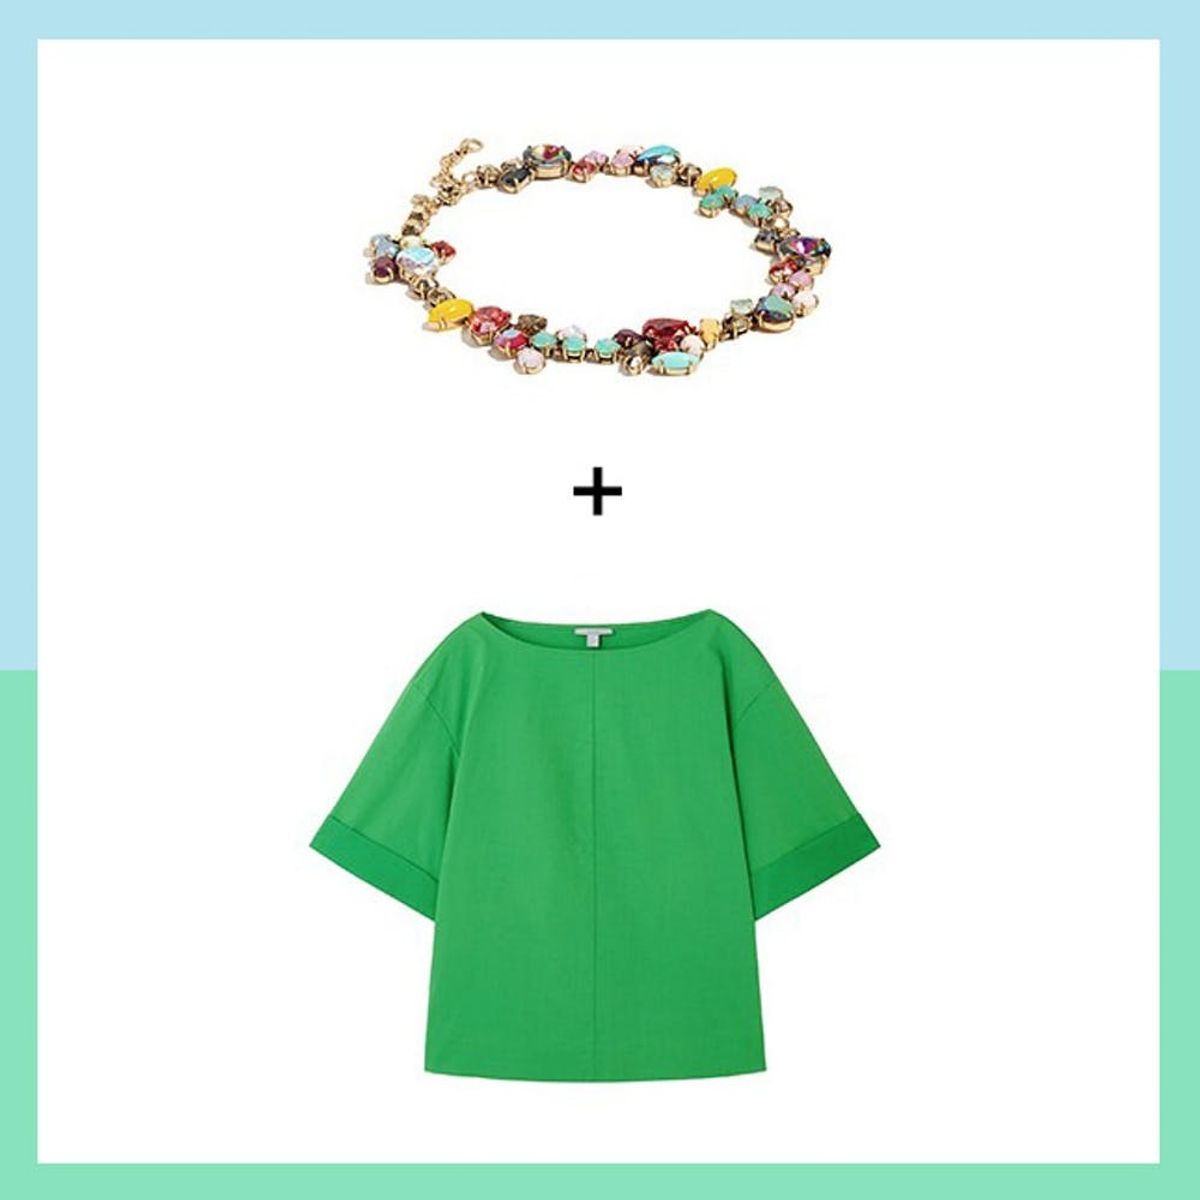 10 Necklaces to Wear With Every Top in Your Summer Wardrobe